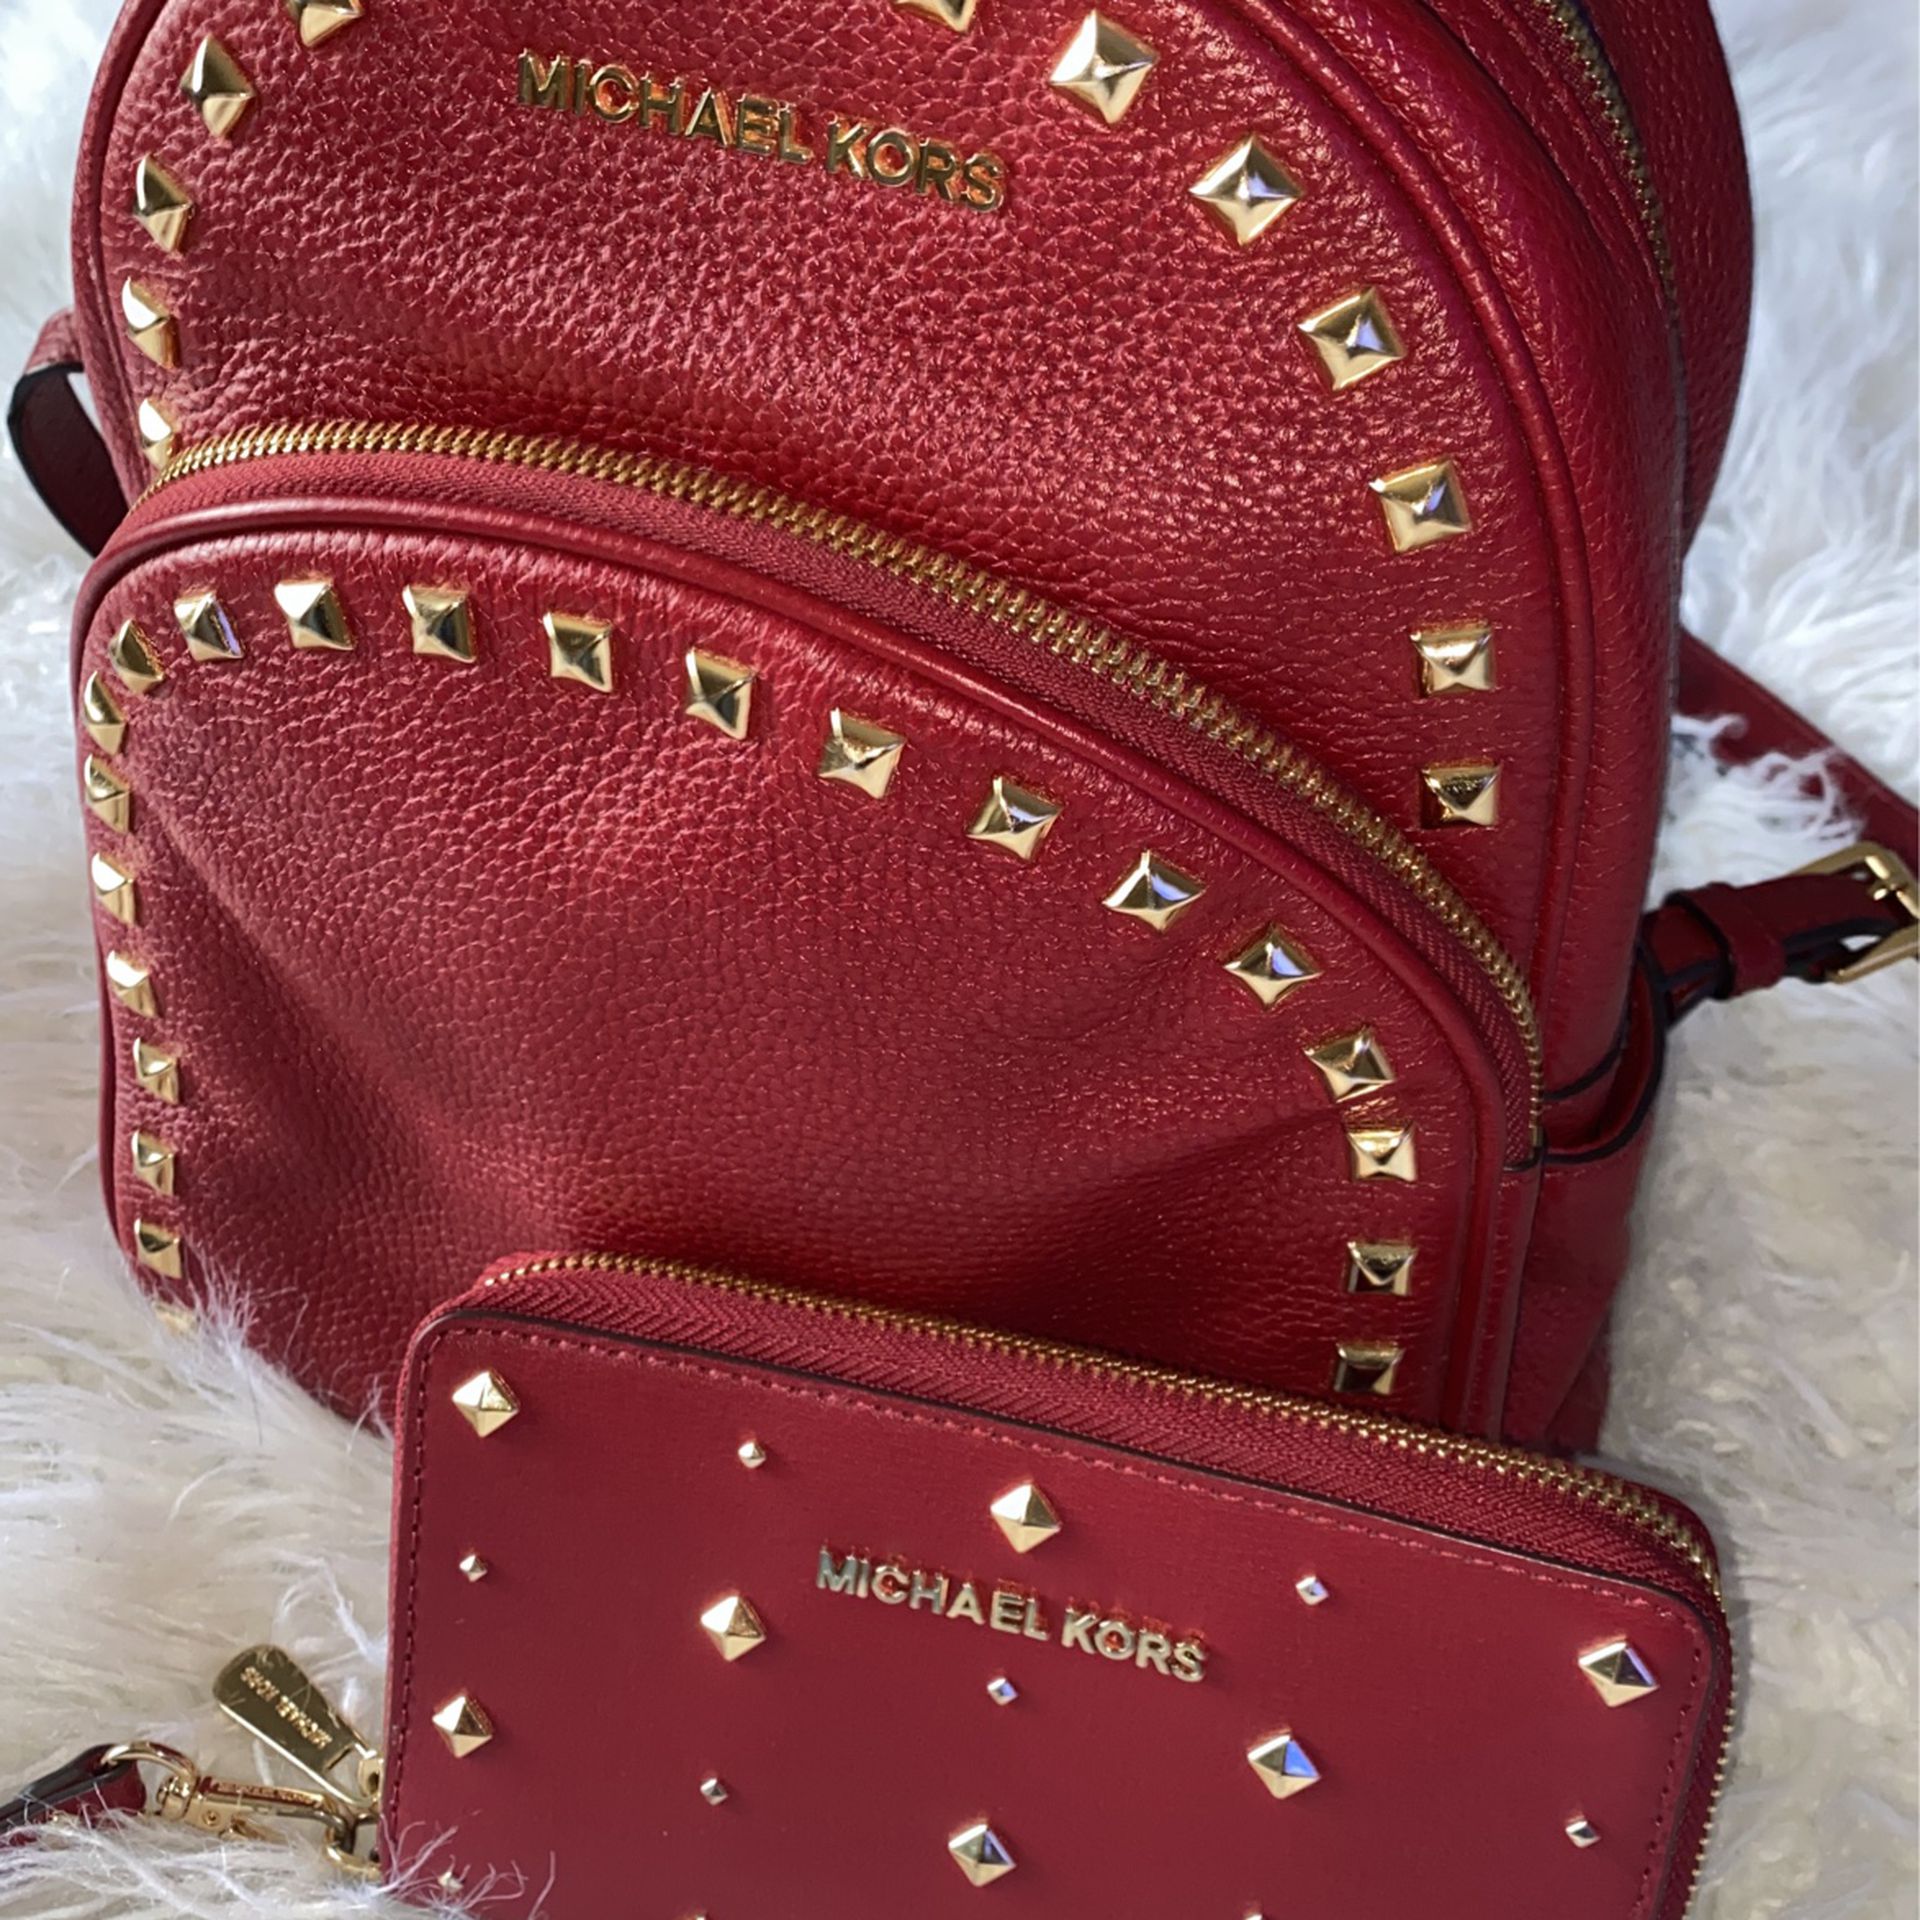 Michael Kors Backpack and wallet in